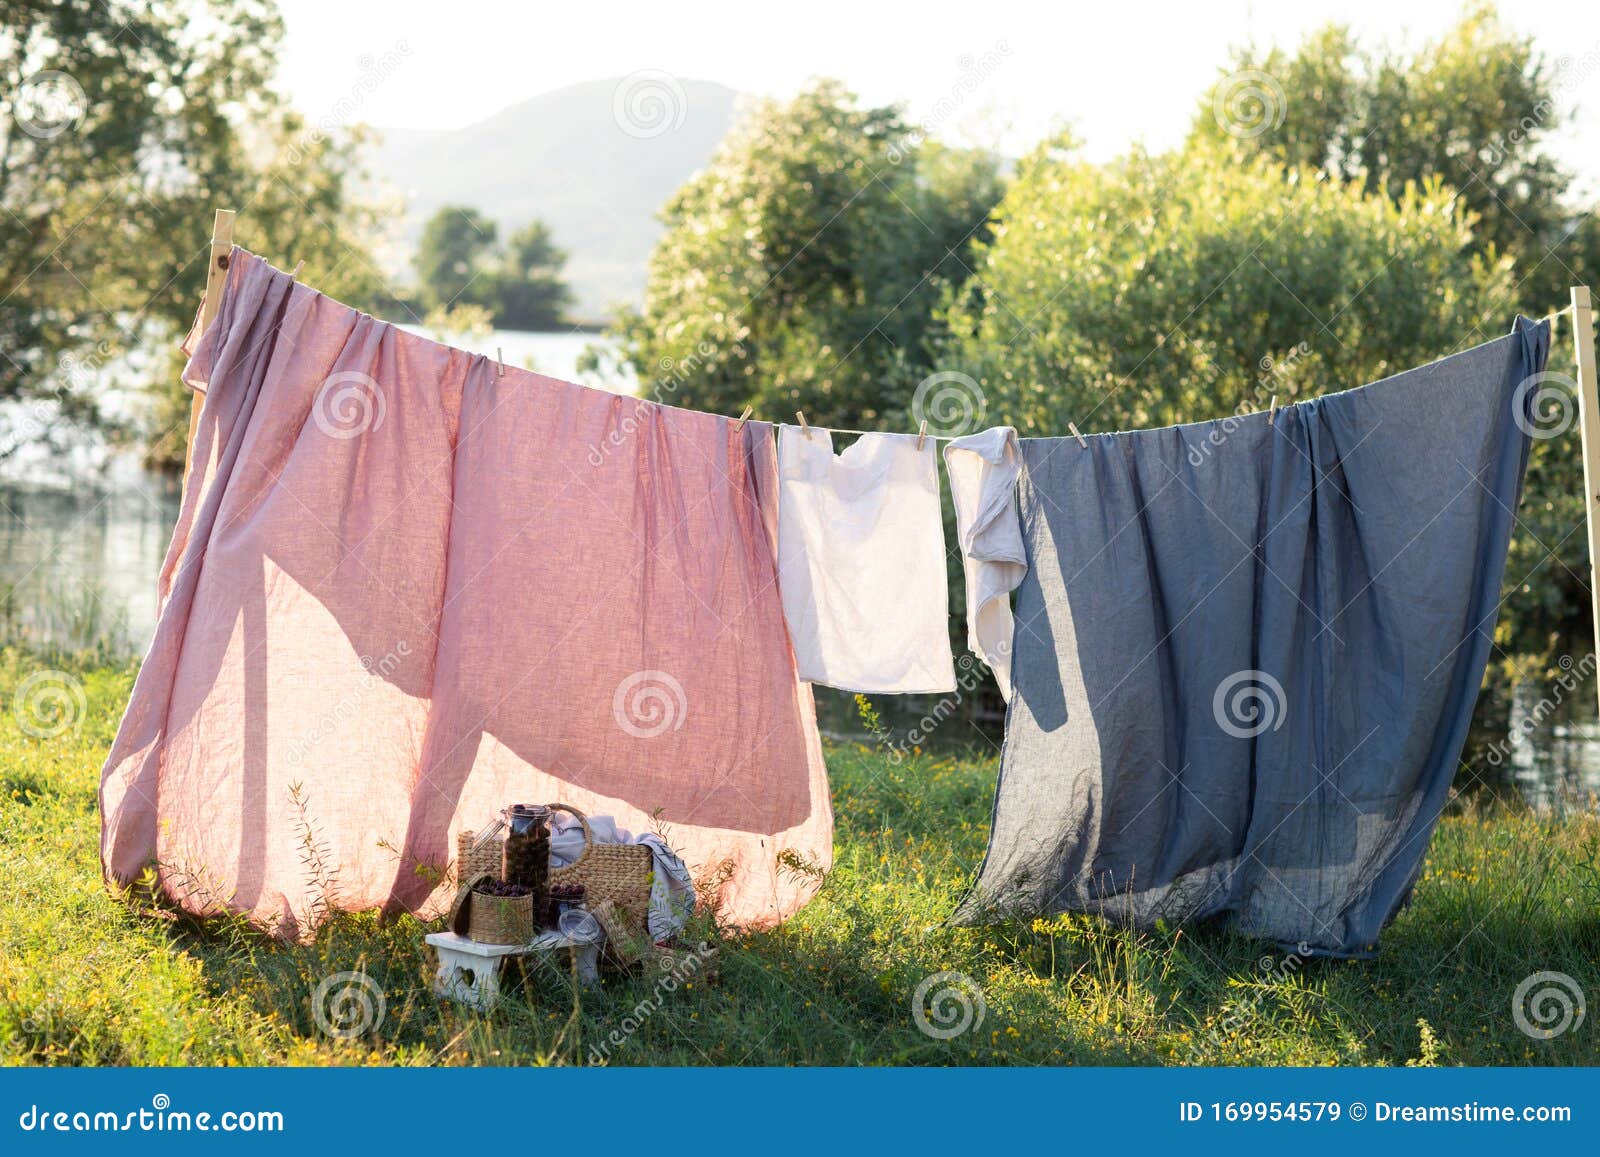 Clean Bed Sheet Hanging on Clothesline. Stock Image - Image of garden ...